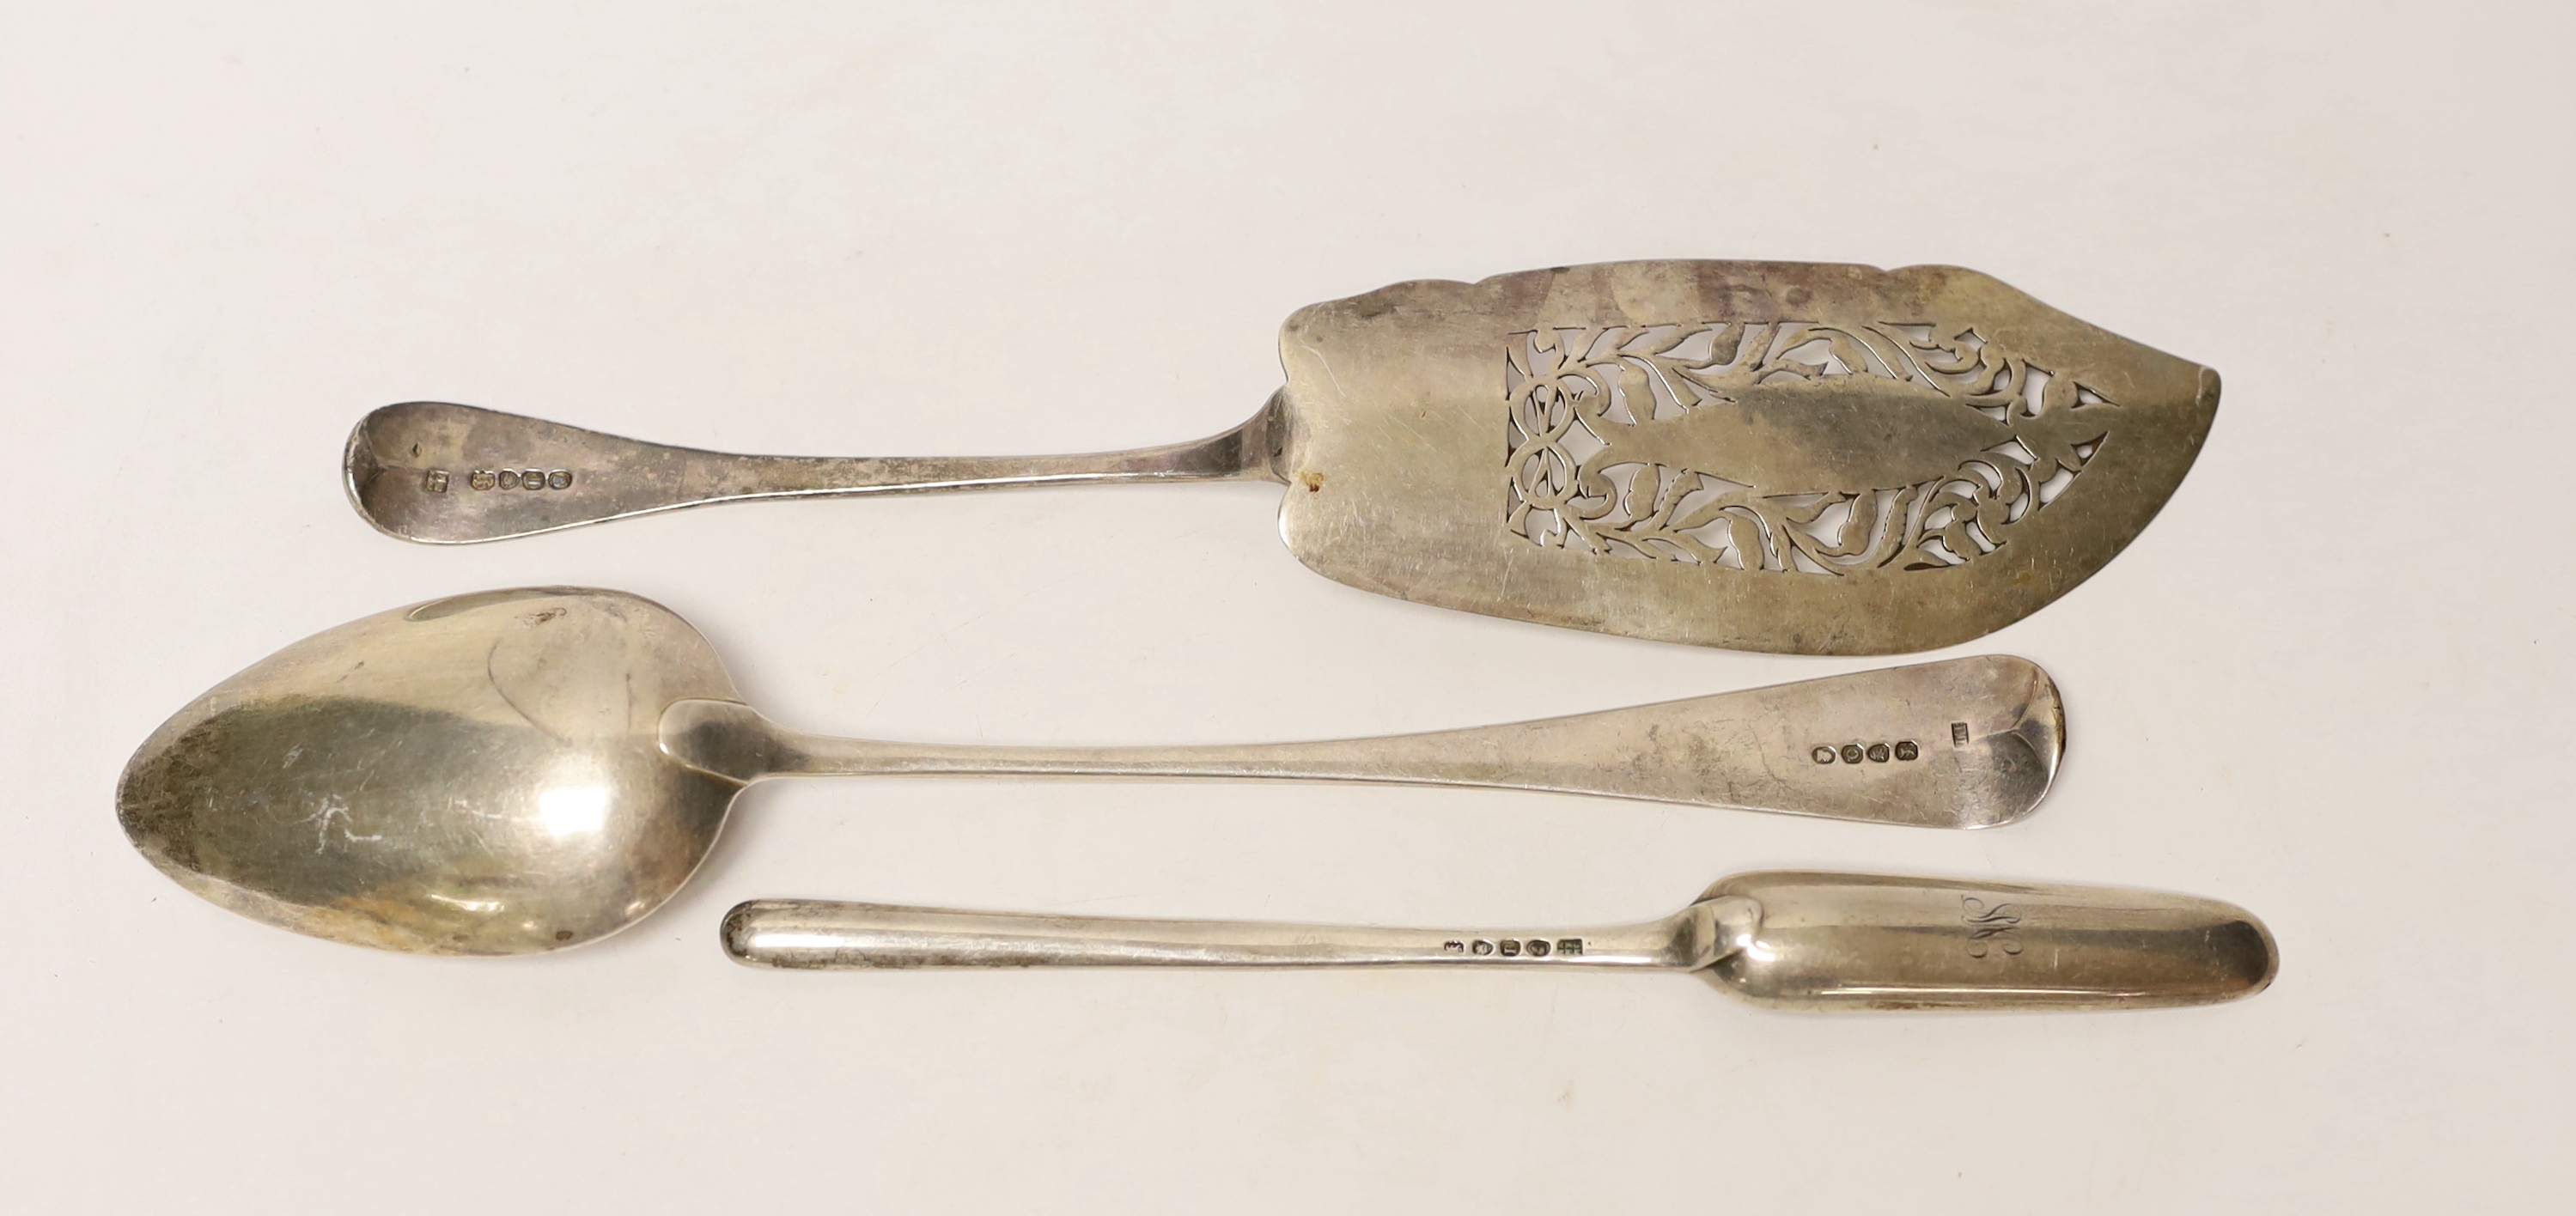 A George III silver marrow scoop, London, 1812, 22.7cm, a Victorian silver Old English pattern fish slice, London, 1838 and a George III silver basting spoon, London, 1811.